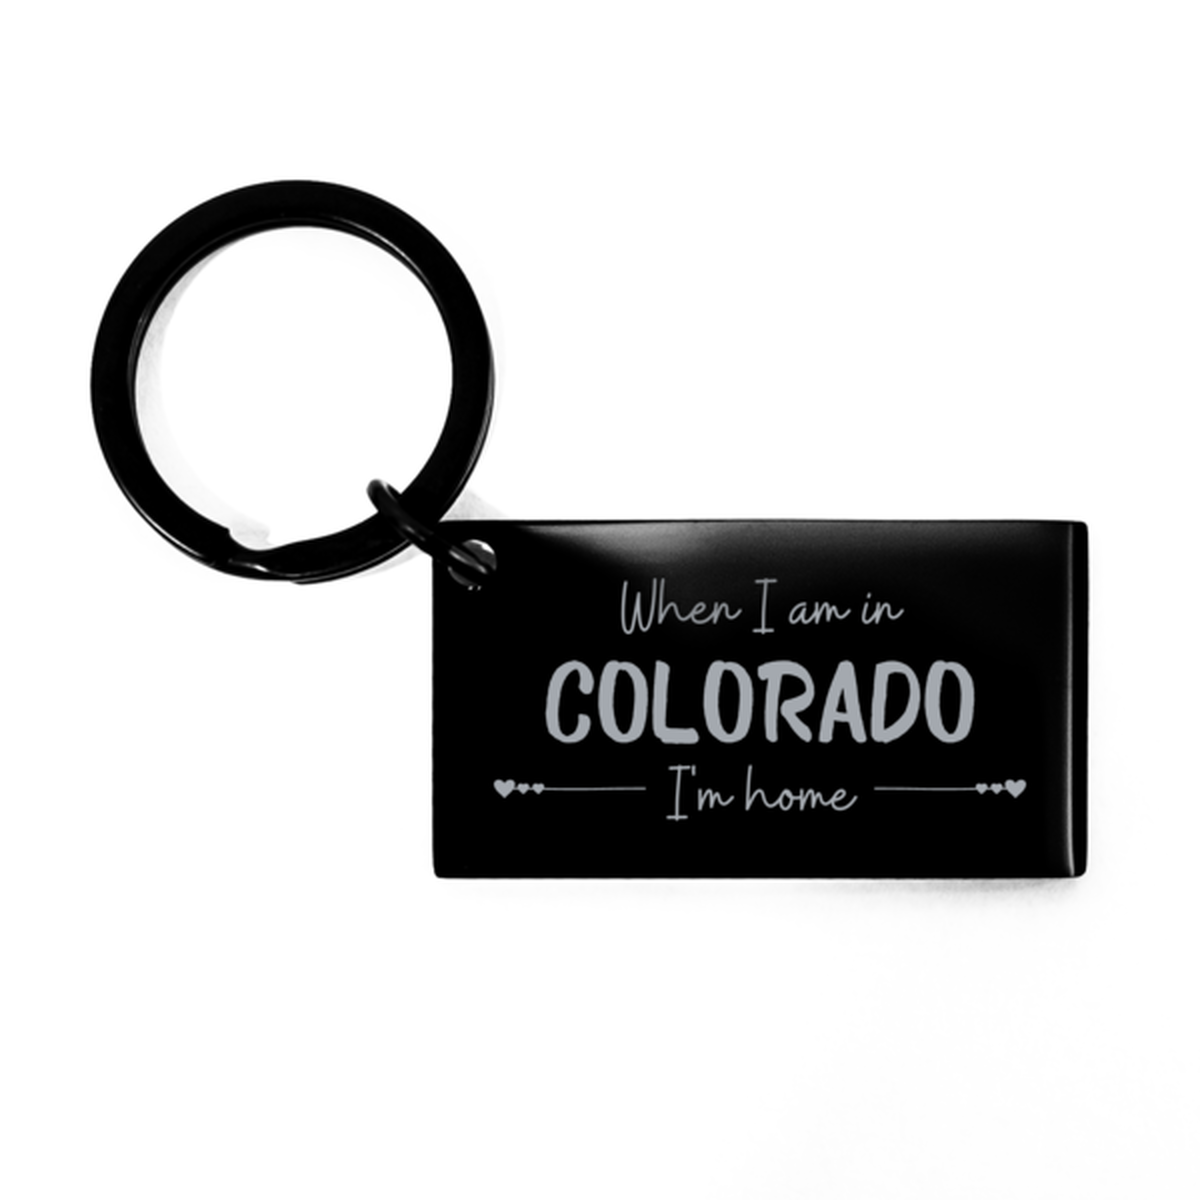 When I am in Colorado I'm home Keychain, Cheap Gifts For Colorado, State Colorado Birthday Gifts for Friends Coworker